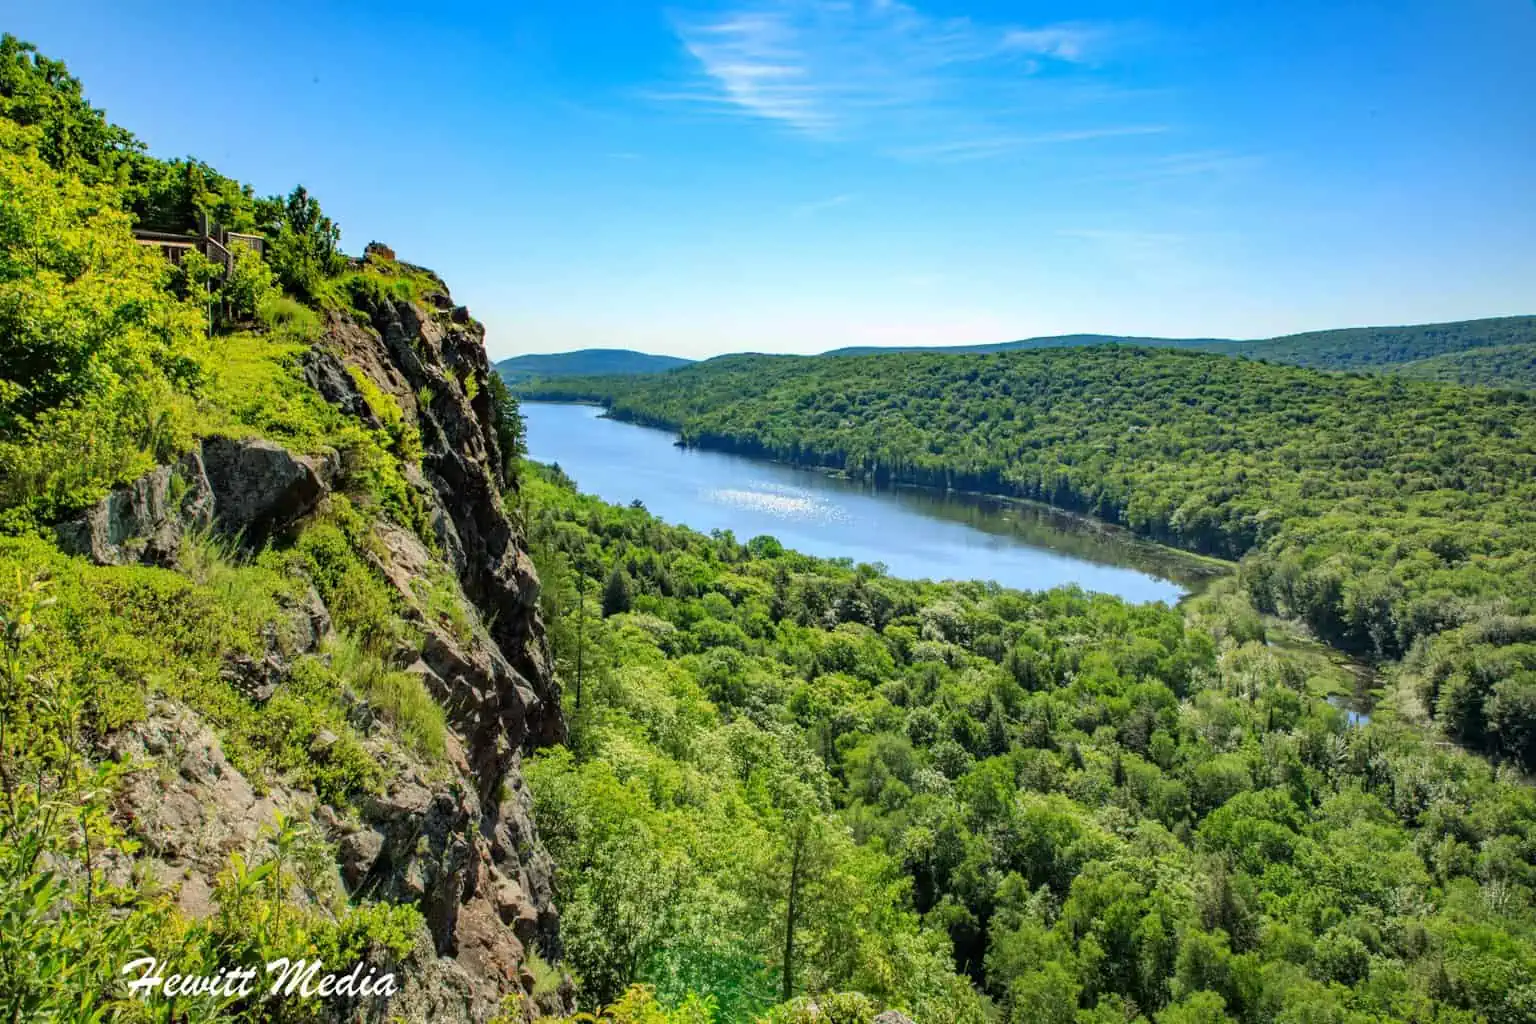 Porcupine Mountains State Wilderness Park